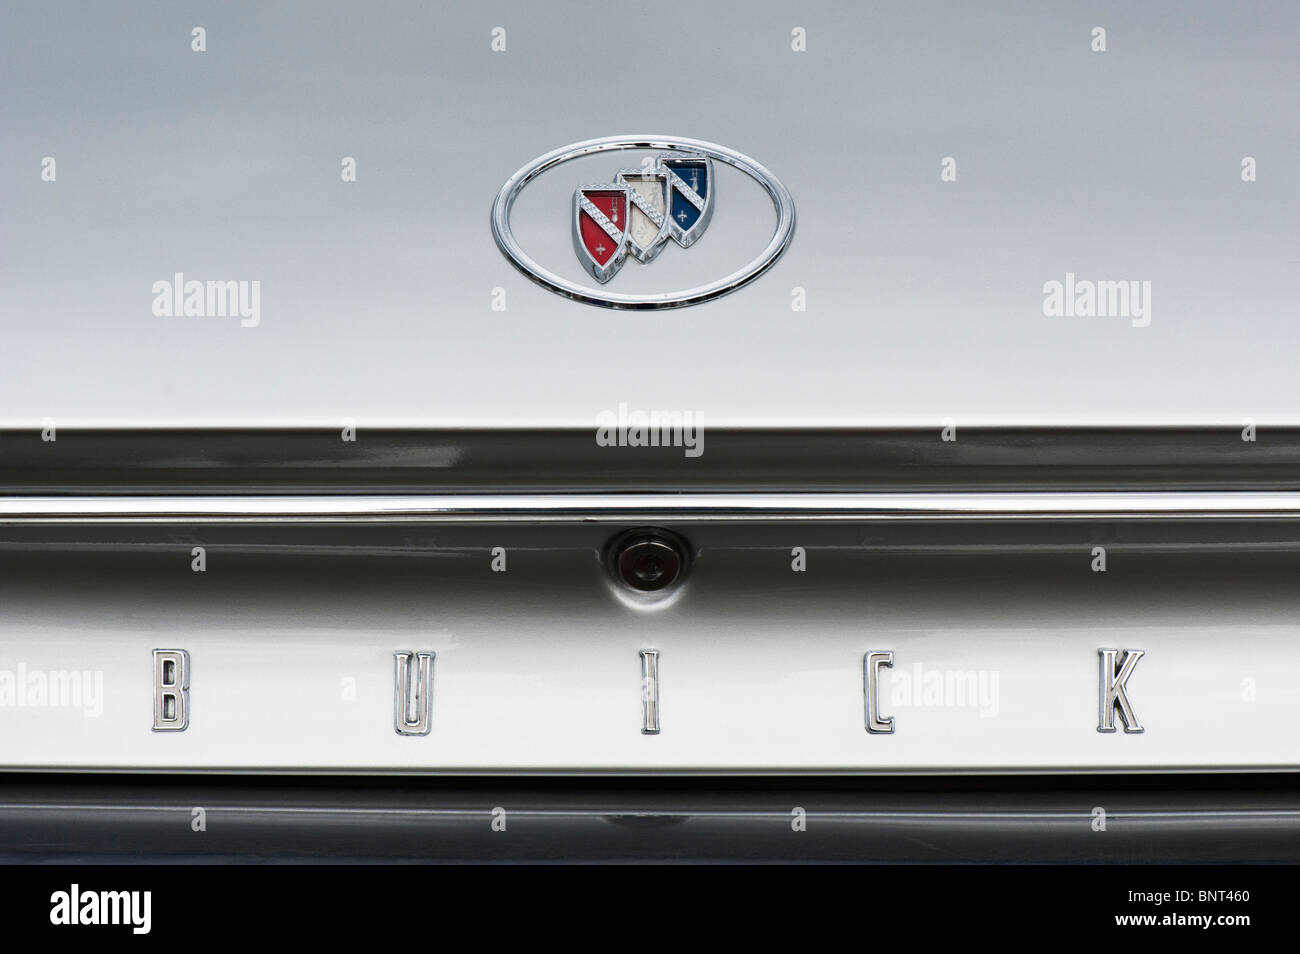 Rear end of a 1961 Buick LeSabre car. Classic American car of the sixties Stock Photo